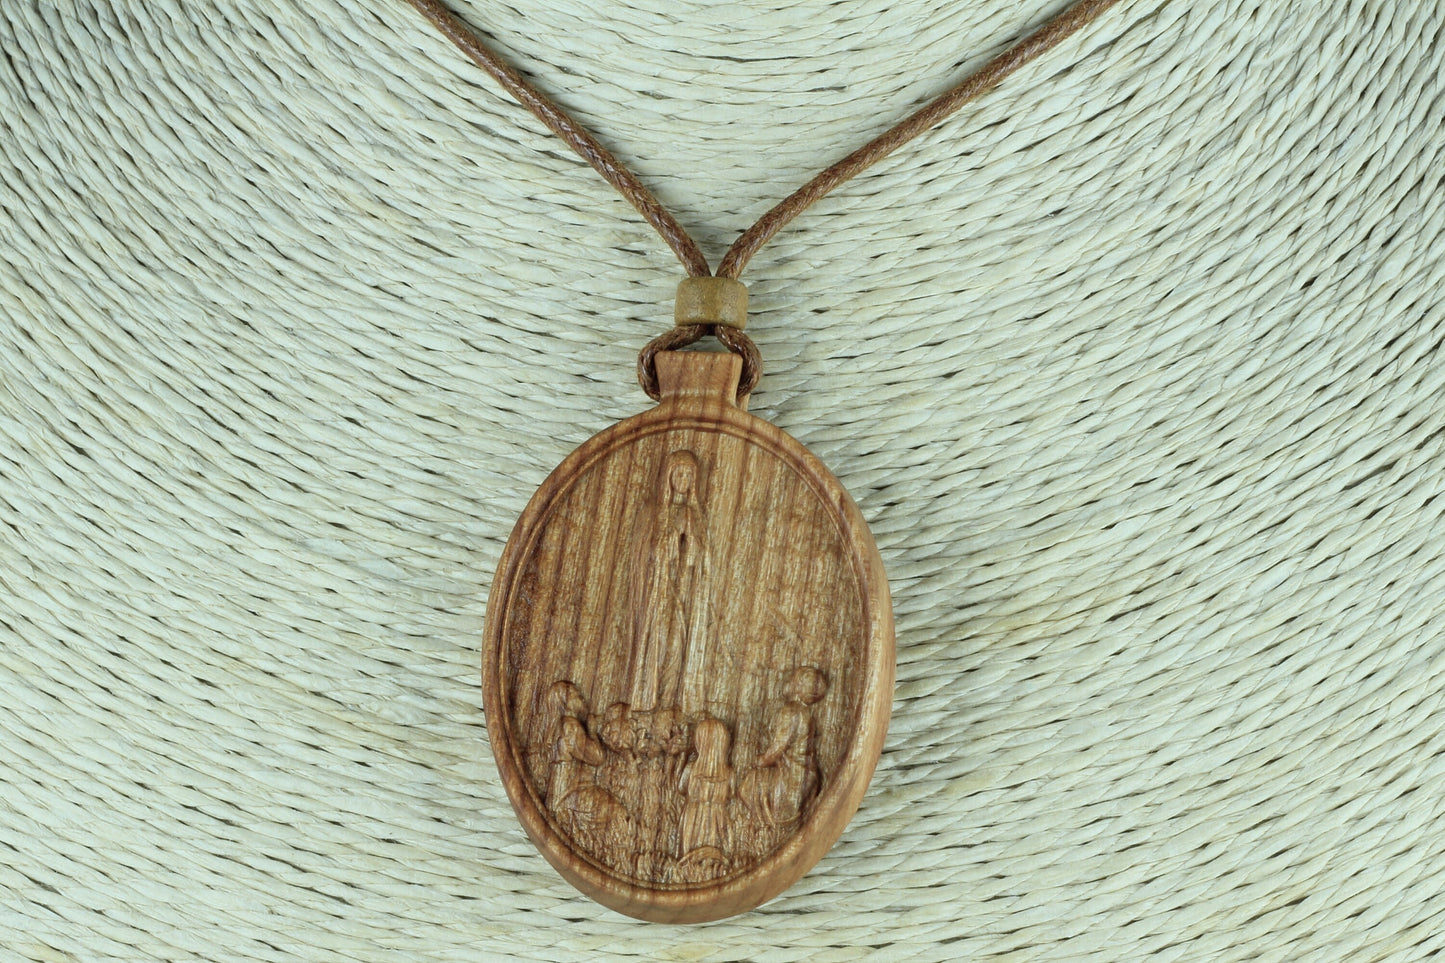 Our Lady of Fatima medallion Virgin Mary necklace Virgin Mary pendant Wood necklace Catholic necklace